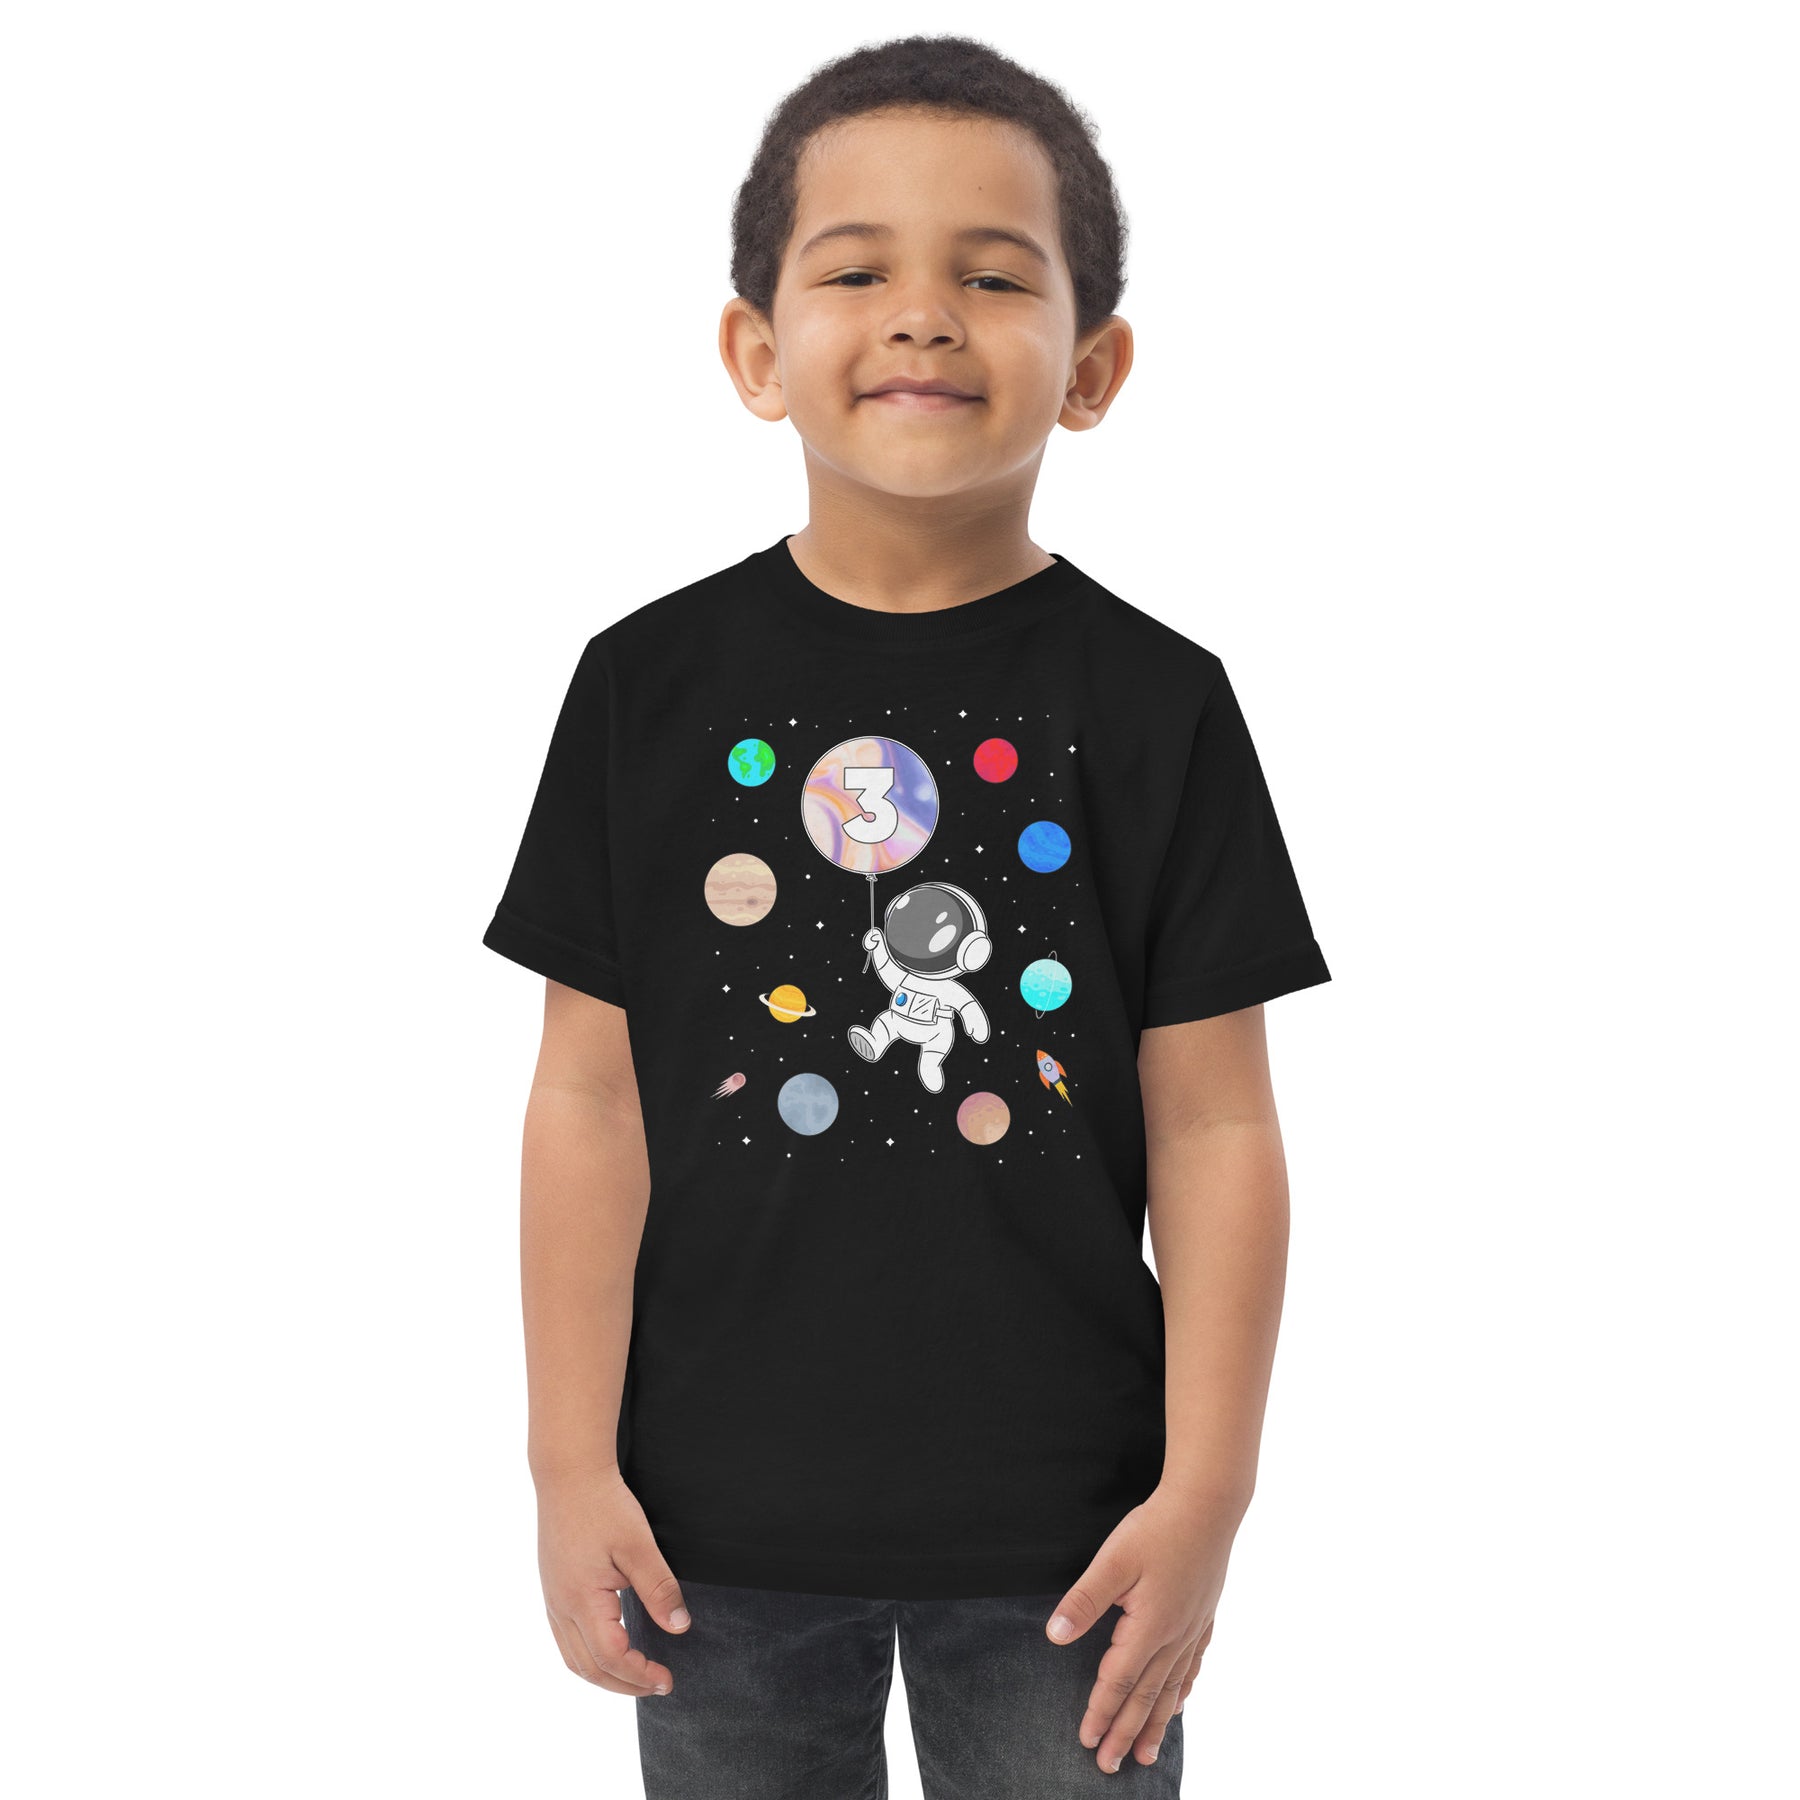 Astronaut 3rd Birthday Shirt, Galaxy Space Themed Tee, Rocket and Planets Birthday Party Outfit for Three Year Olds